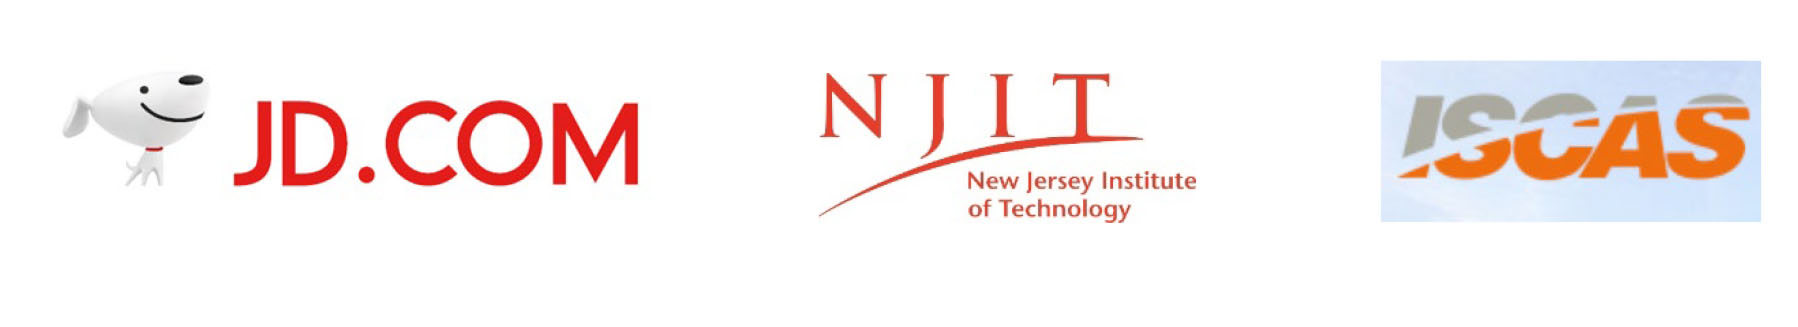 JD.com, NJIT and ISC